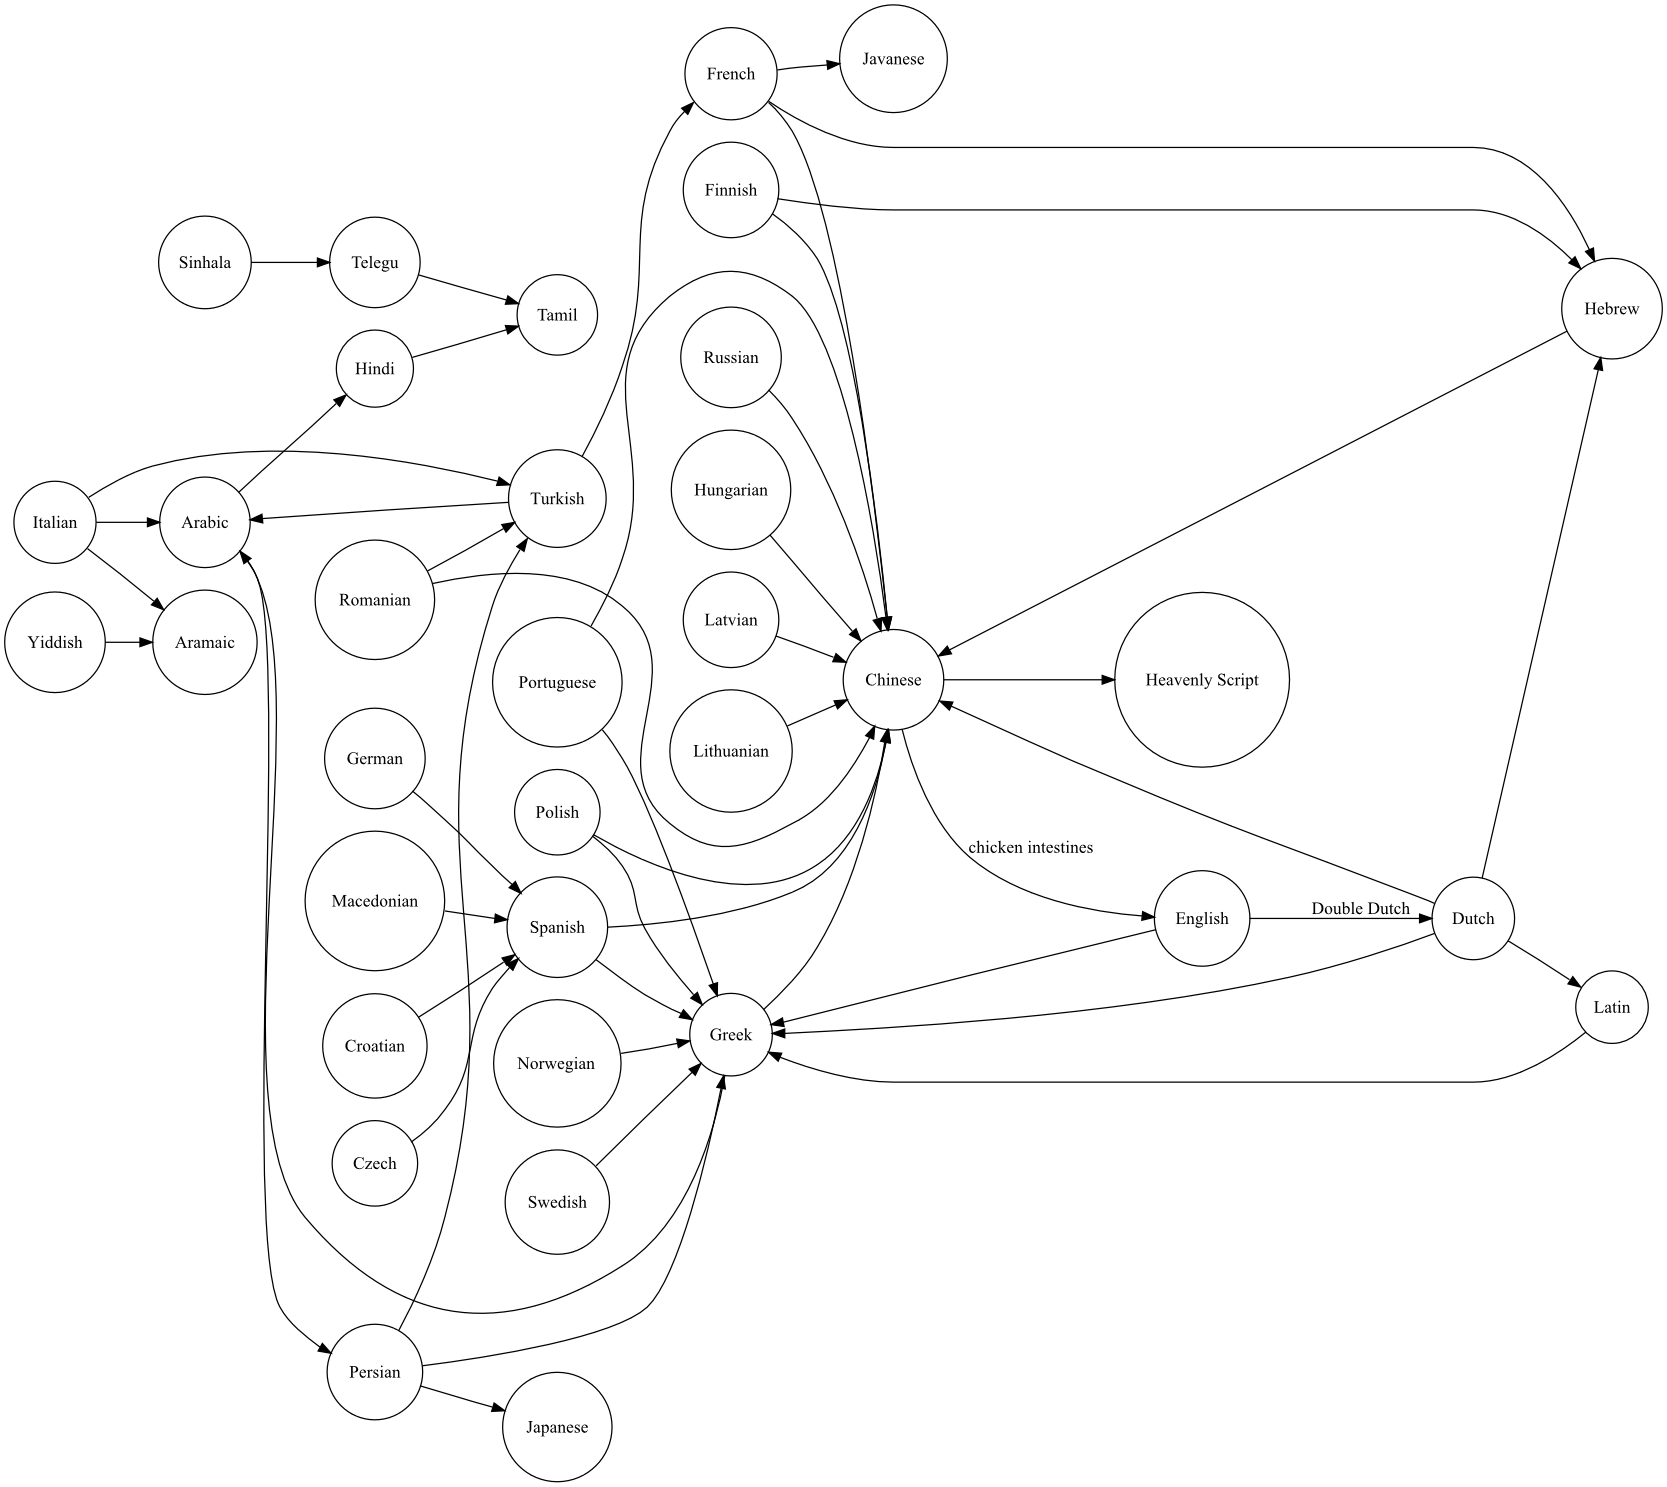 The directed graph of stereotypical incomprehensibility - Mark Liberman